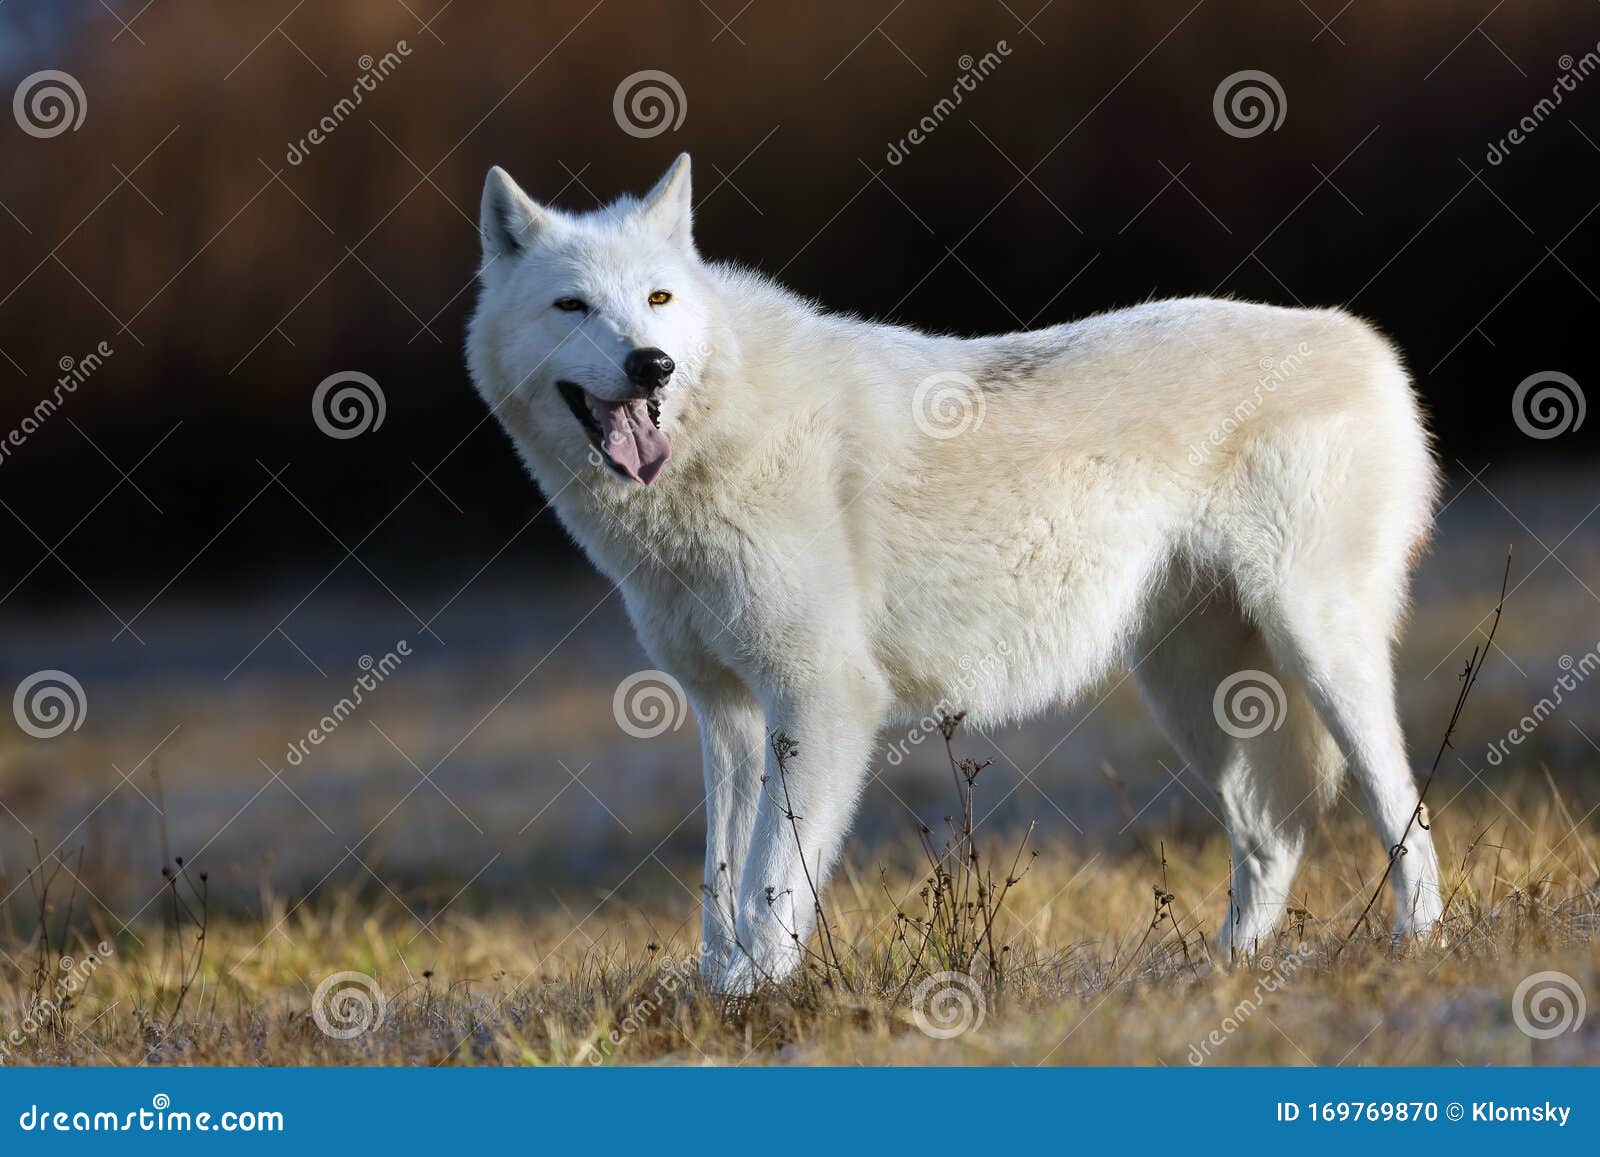 hudson bay wolf canis lupus hudsonicus subspecies of the wolf canis lupus also known as the grey/gray wolf or arctic wolf